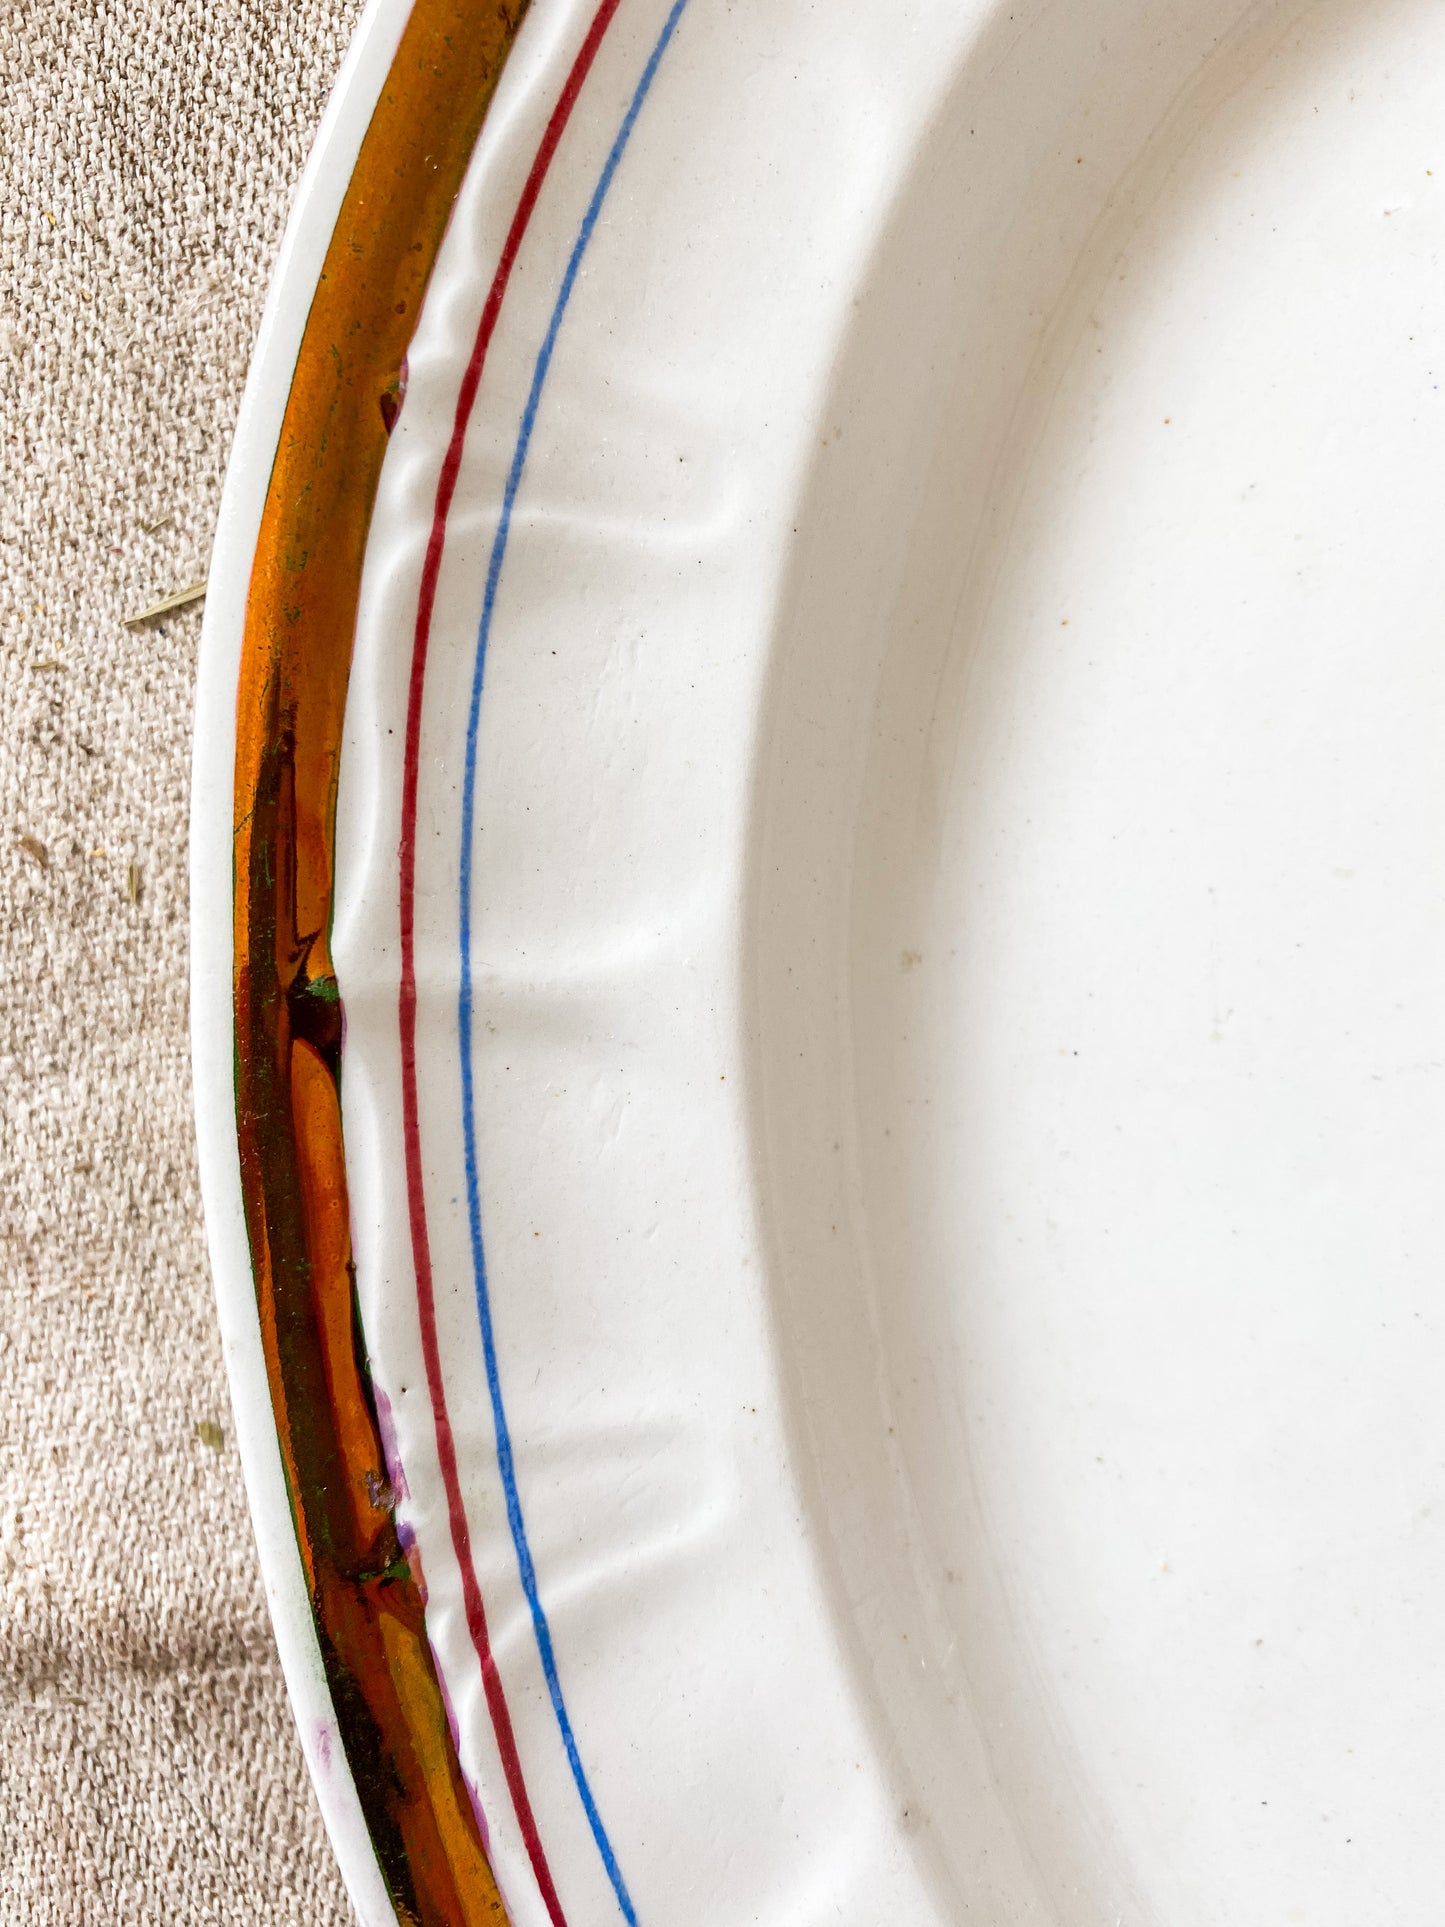 Antique White Ironstone Platter with Copper Luster Band and Pinstripes | Livesley Powell & Co, c1860